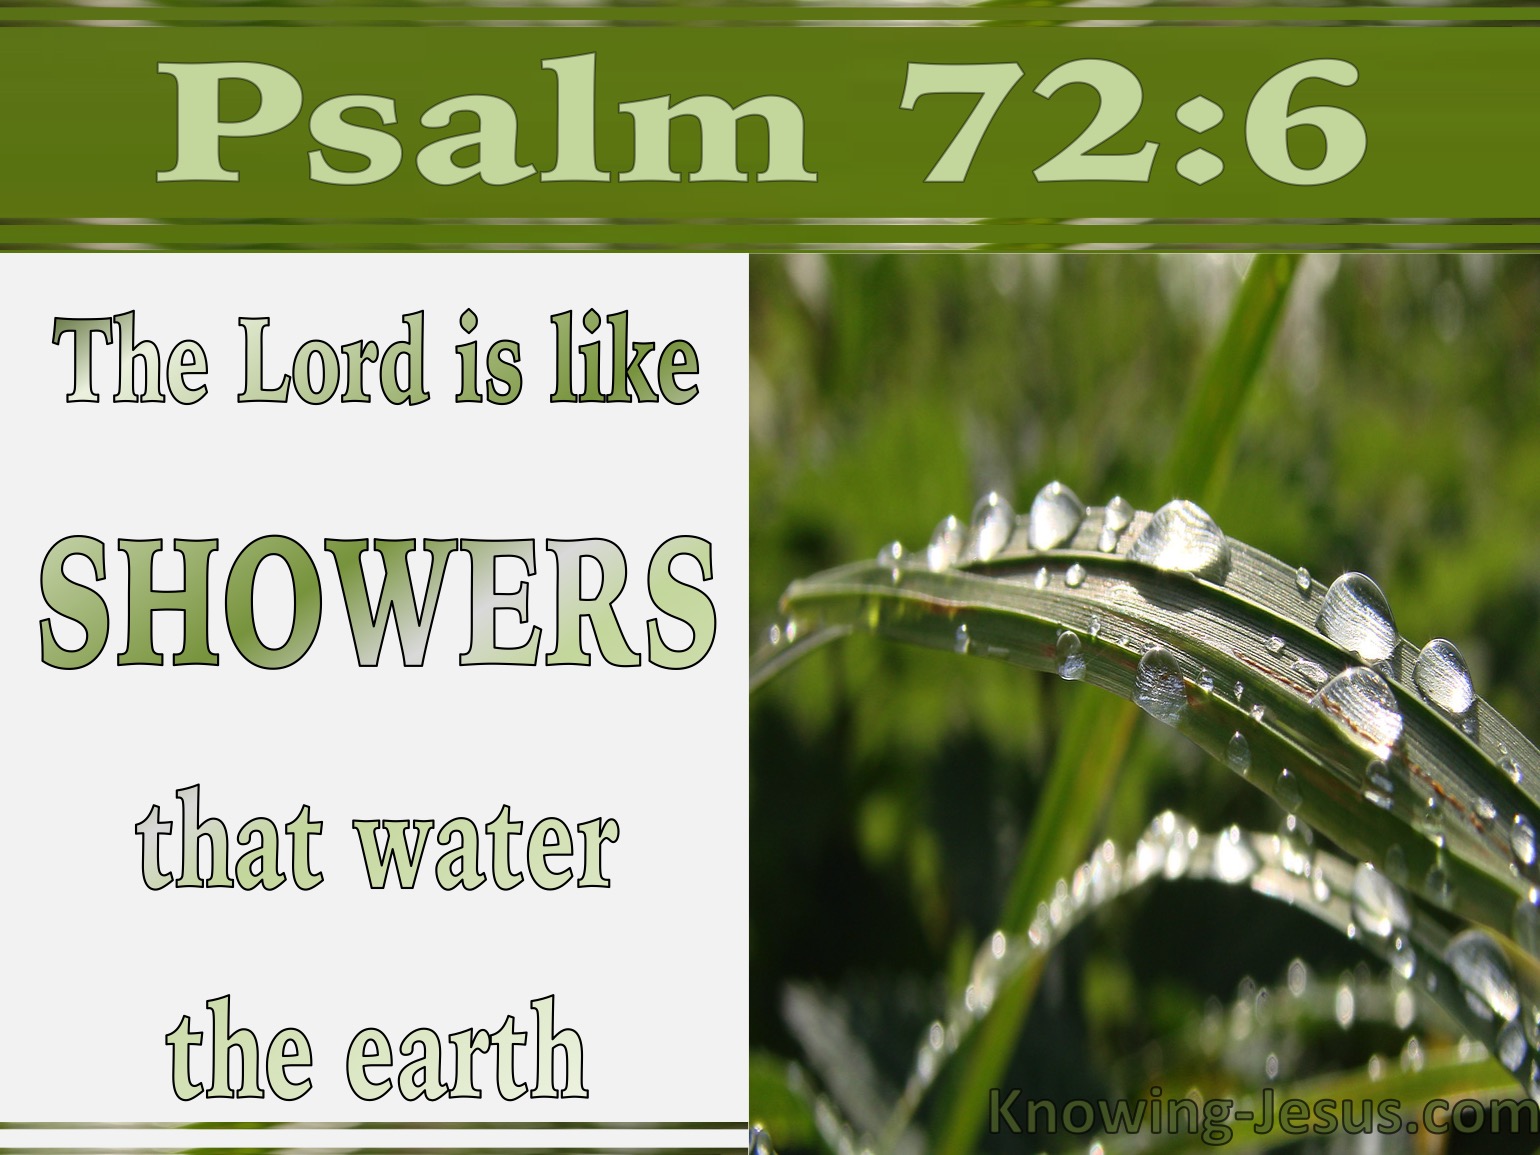 What Does Psalm 72:6 Mean?